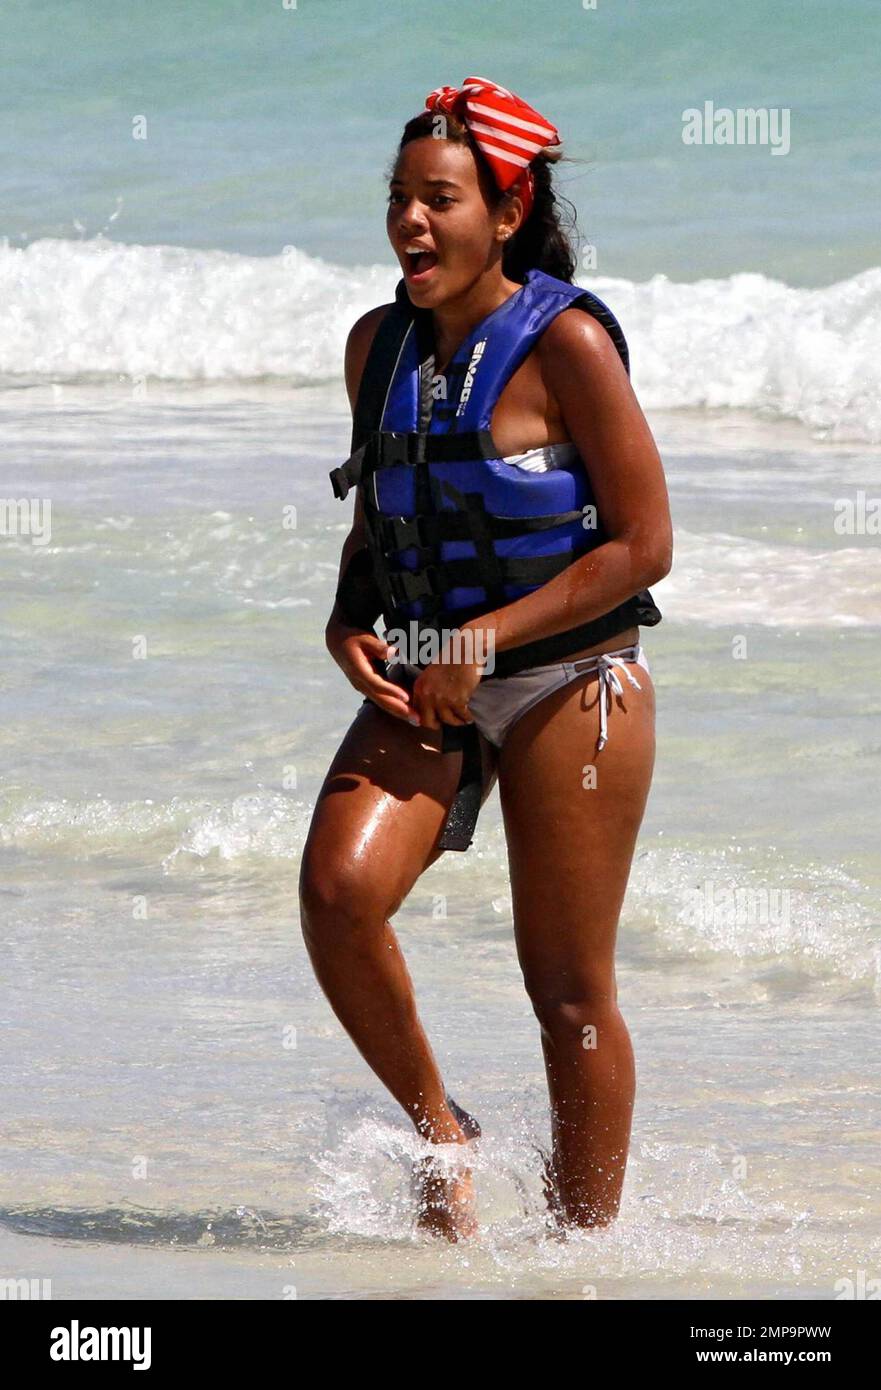 American socialite and entrepreneur, Angela Simmons, best known as the daughter of Run-D.M.C.'s Rev Run and neice of hip-hop legend Russell Simmons, wears a silver bikini paired with a floppy red scarf on her head as she spends an afternoon with a friend soaking up the sun on trendy South Beach. Angela looked like she had a blast while jet skiing and donned a zebra-print cover-up as she strolled with her friend on the sand. Miami Beach, FL.  3/1/11. Stock Photo